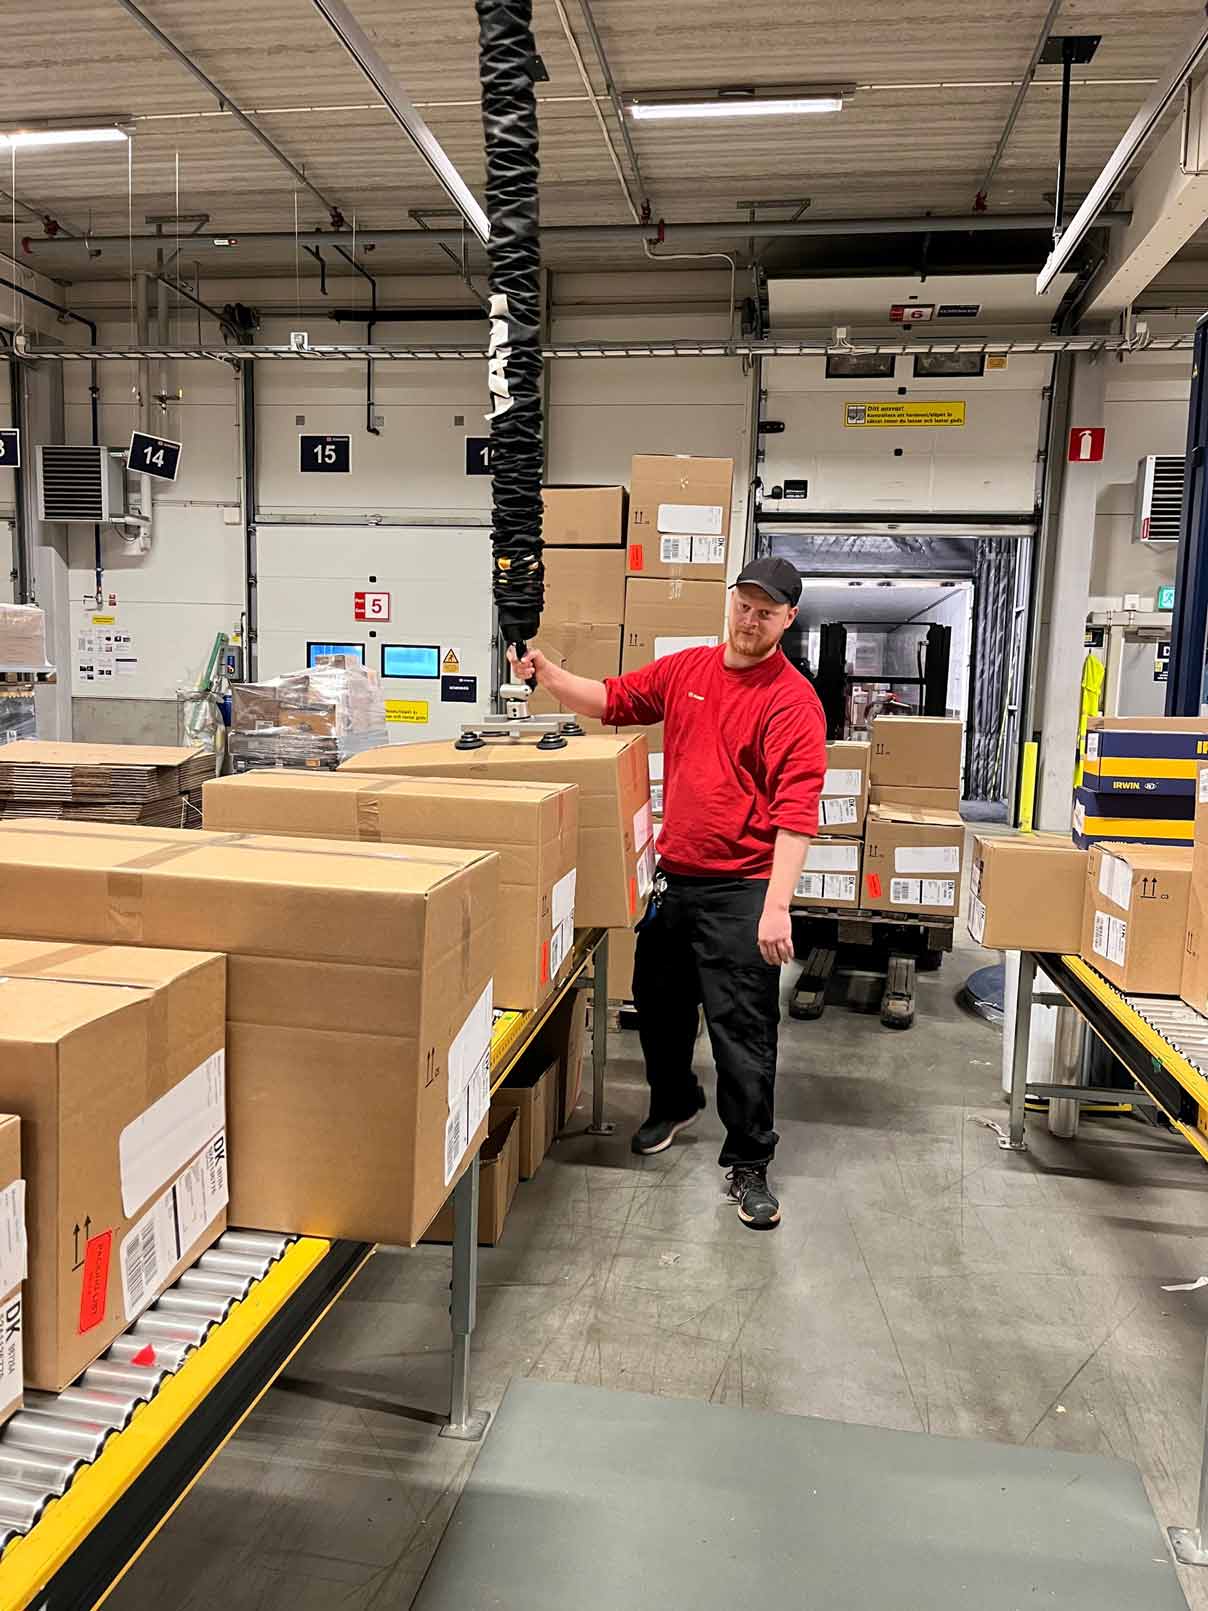 Man lifting large box from conveyor belt in DB Schenker distribution warehouse